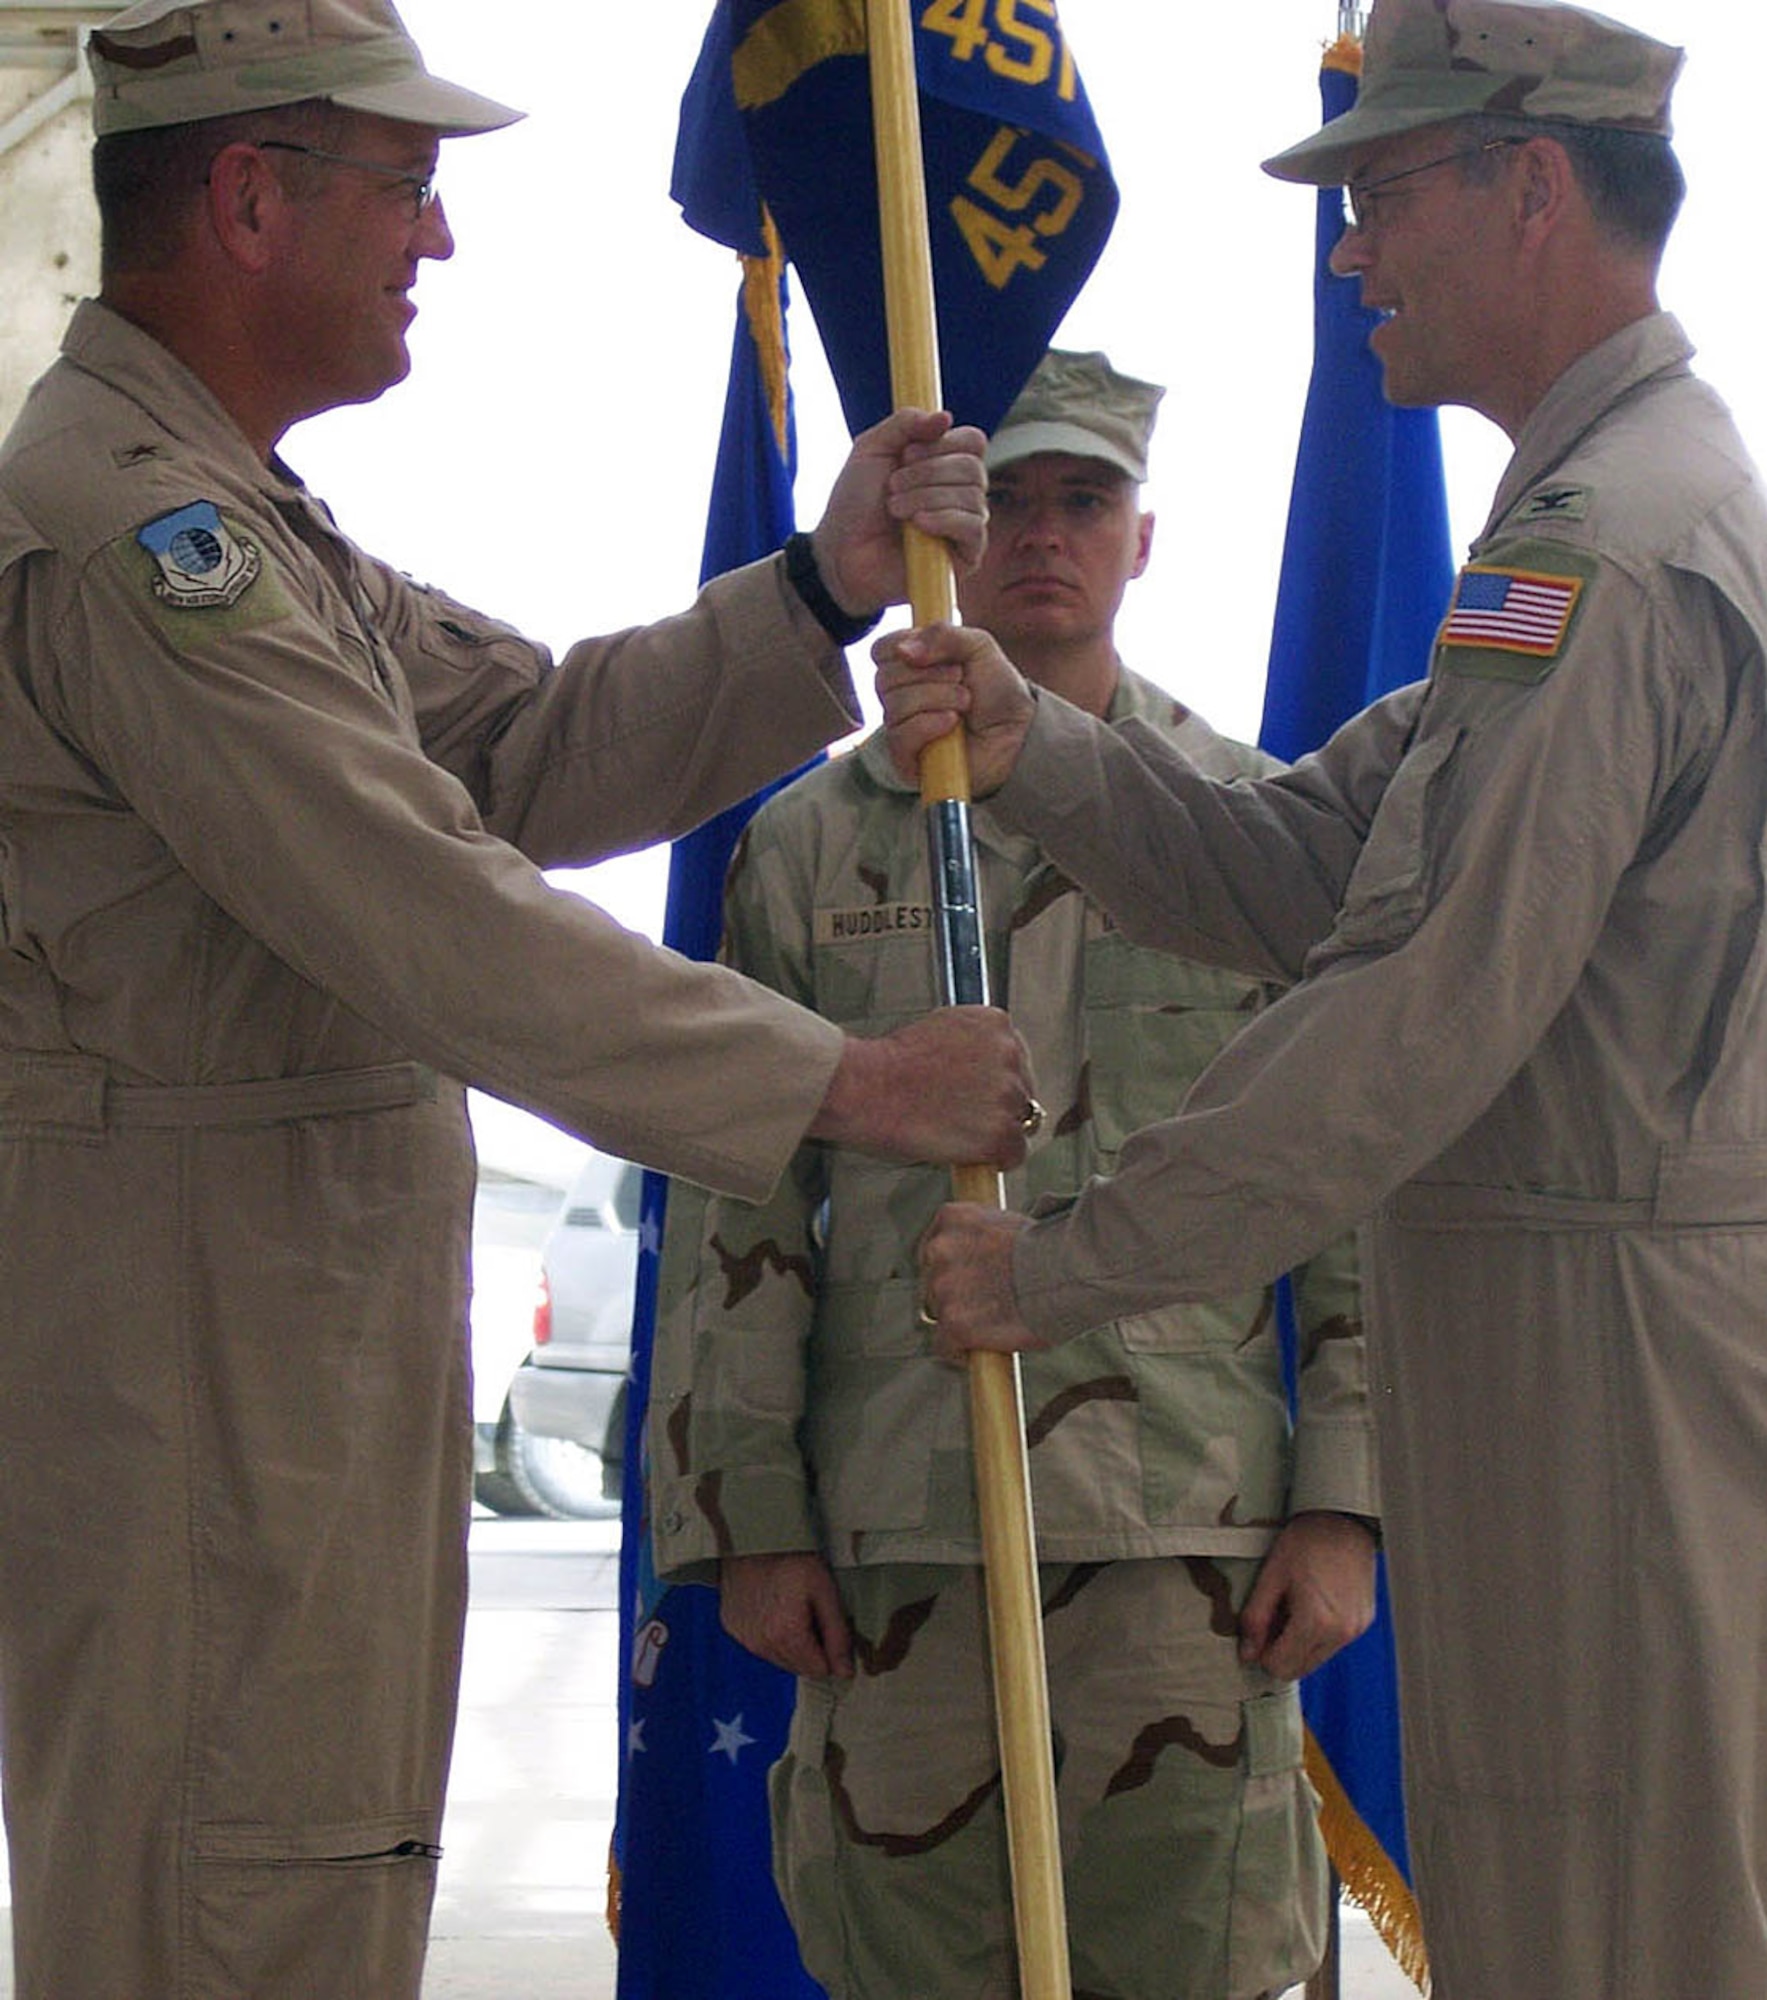 Col. Max Della Pia (right) accepts the 451st Air Expeditionary Group guidon from Brig. Gen. Bill Hyatt, 455th Air Expeditionary Wing commander, signifying the change in command for the group. In addition to the group command, Col. Della Pia also assumed the duties of senior airfield authority. (U.S. Air Force photo by Staff Sgt. Jonathan Dennis)